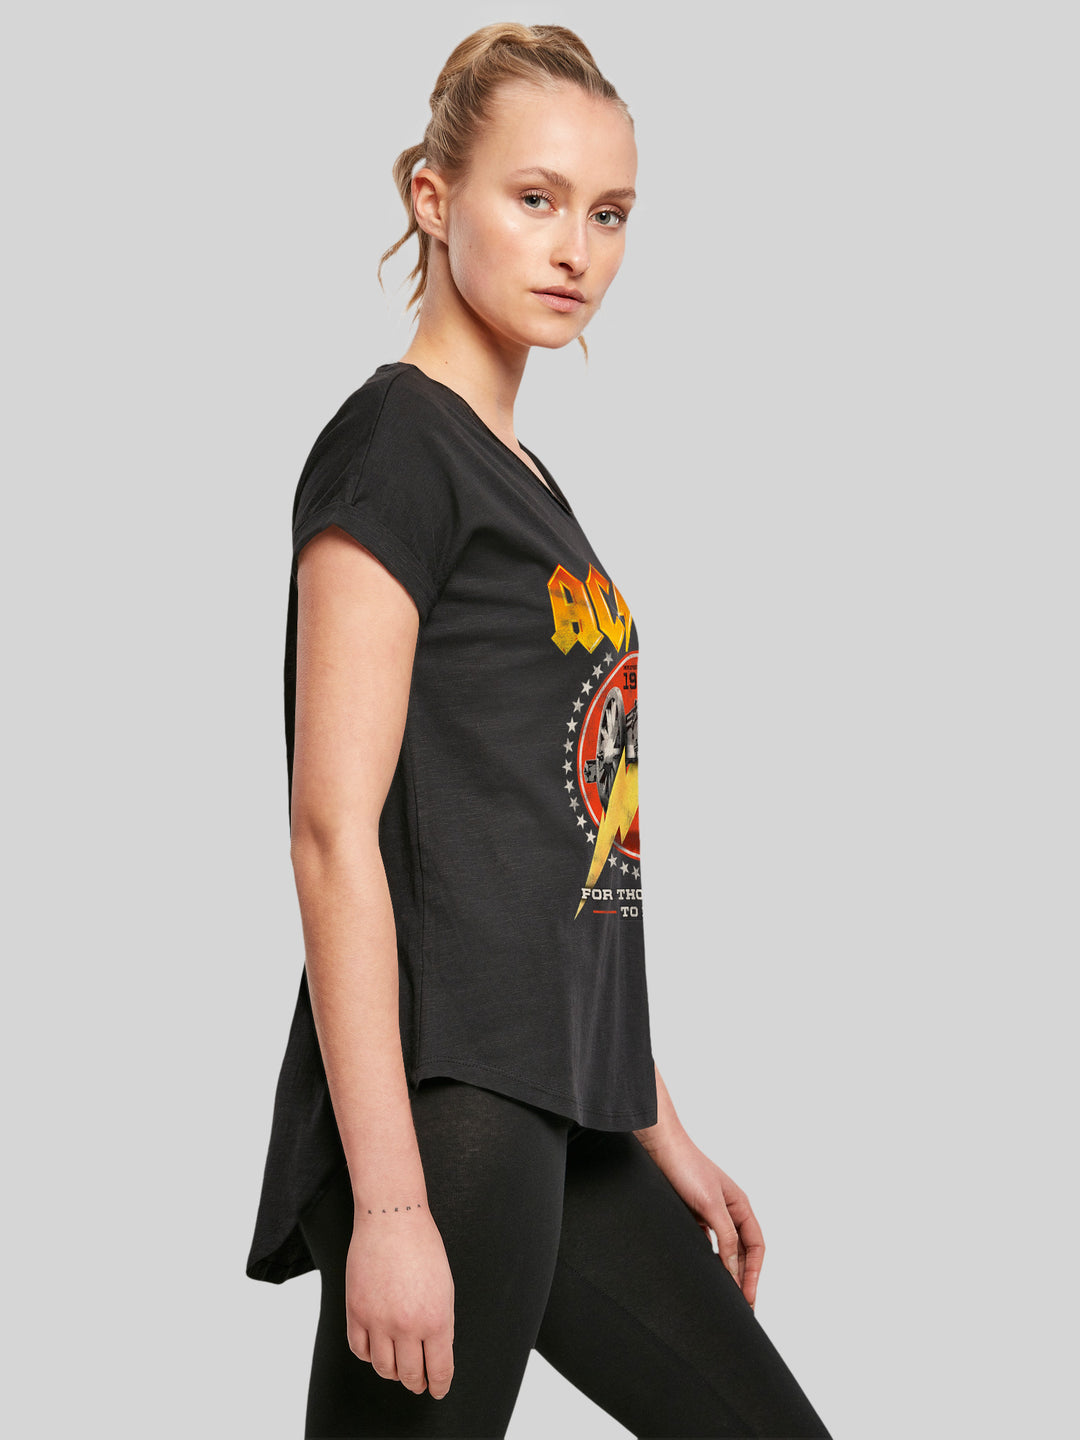 ACDC T-Shirt | For Those About To Rock 1981 | Premium Long Ladies Tee